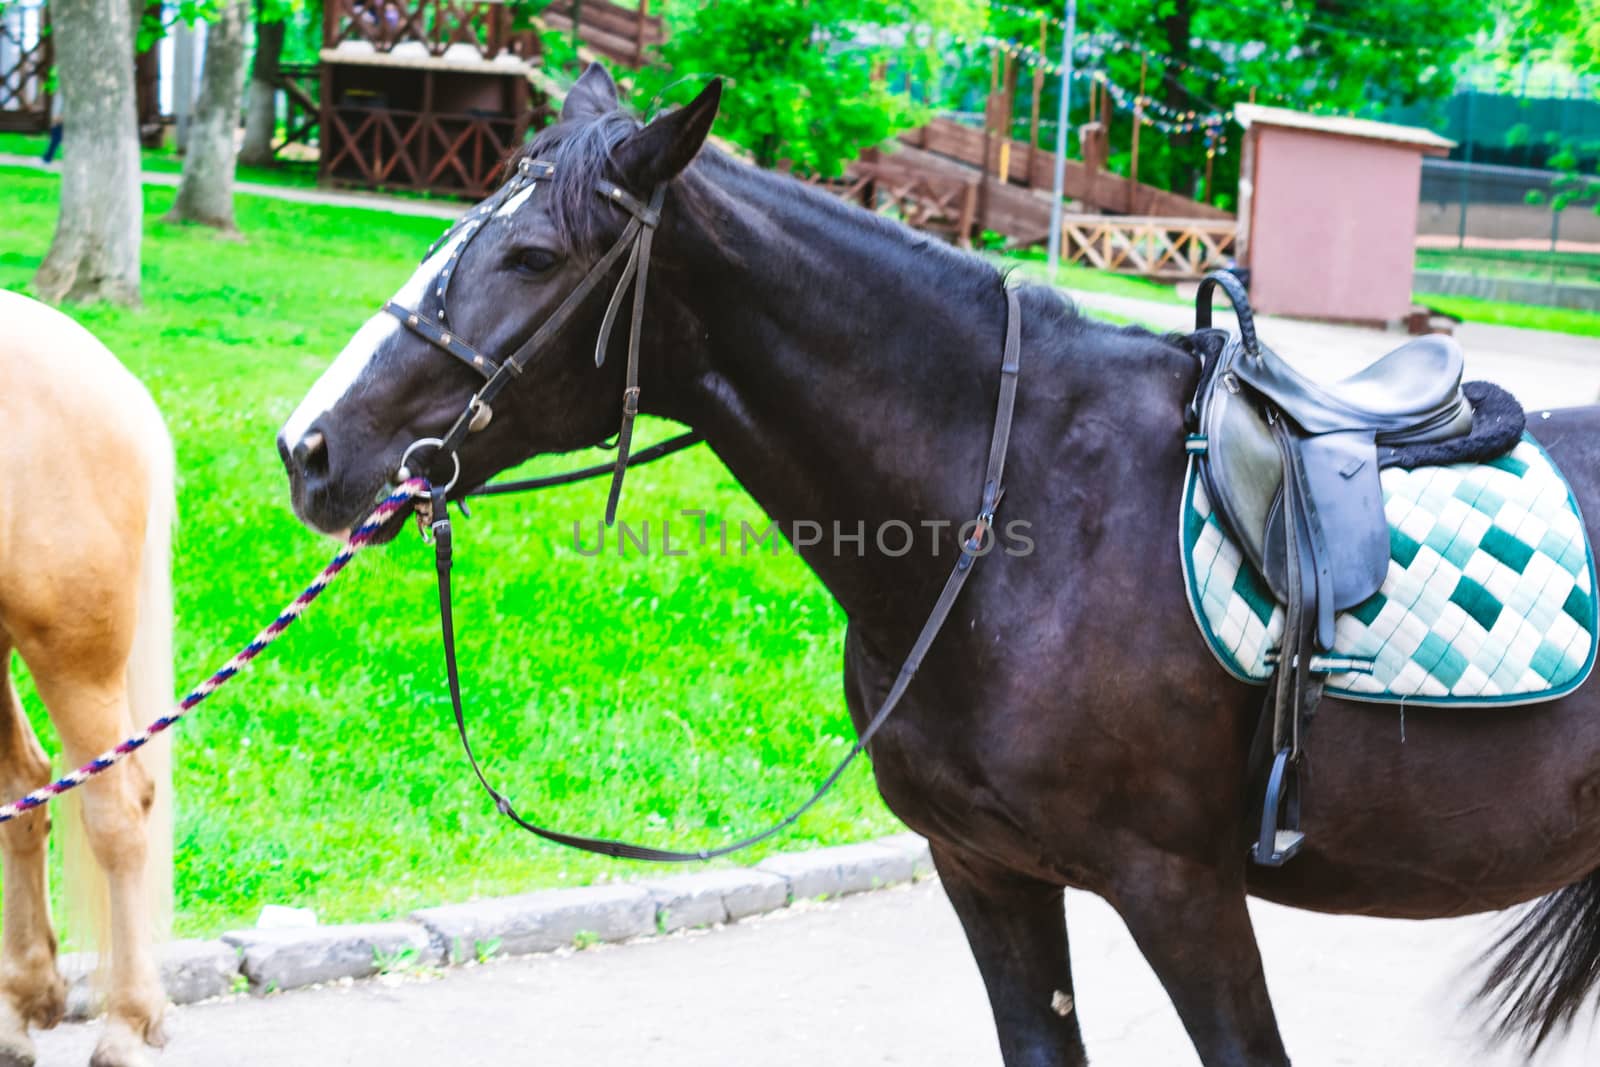 Horses saddled for leisurely riding in the Park by alexandr_sorokin